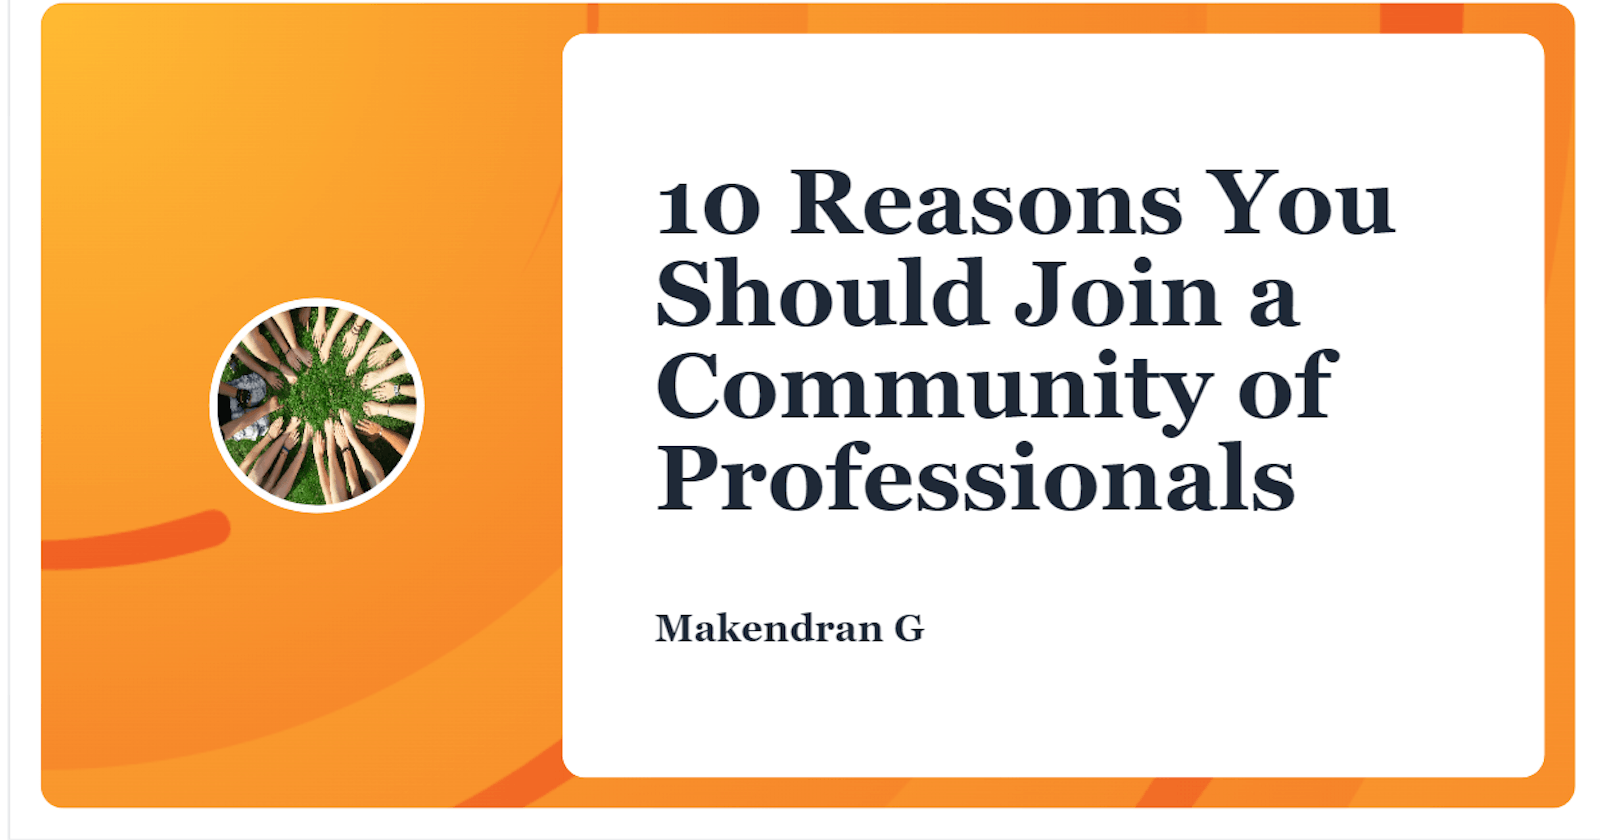 10 Reasons You Should Join a Community of Professionals